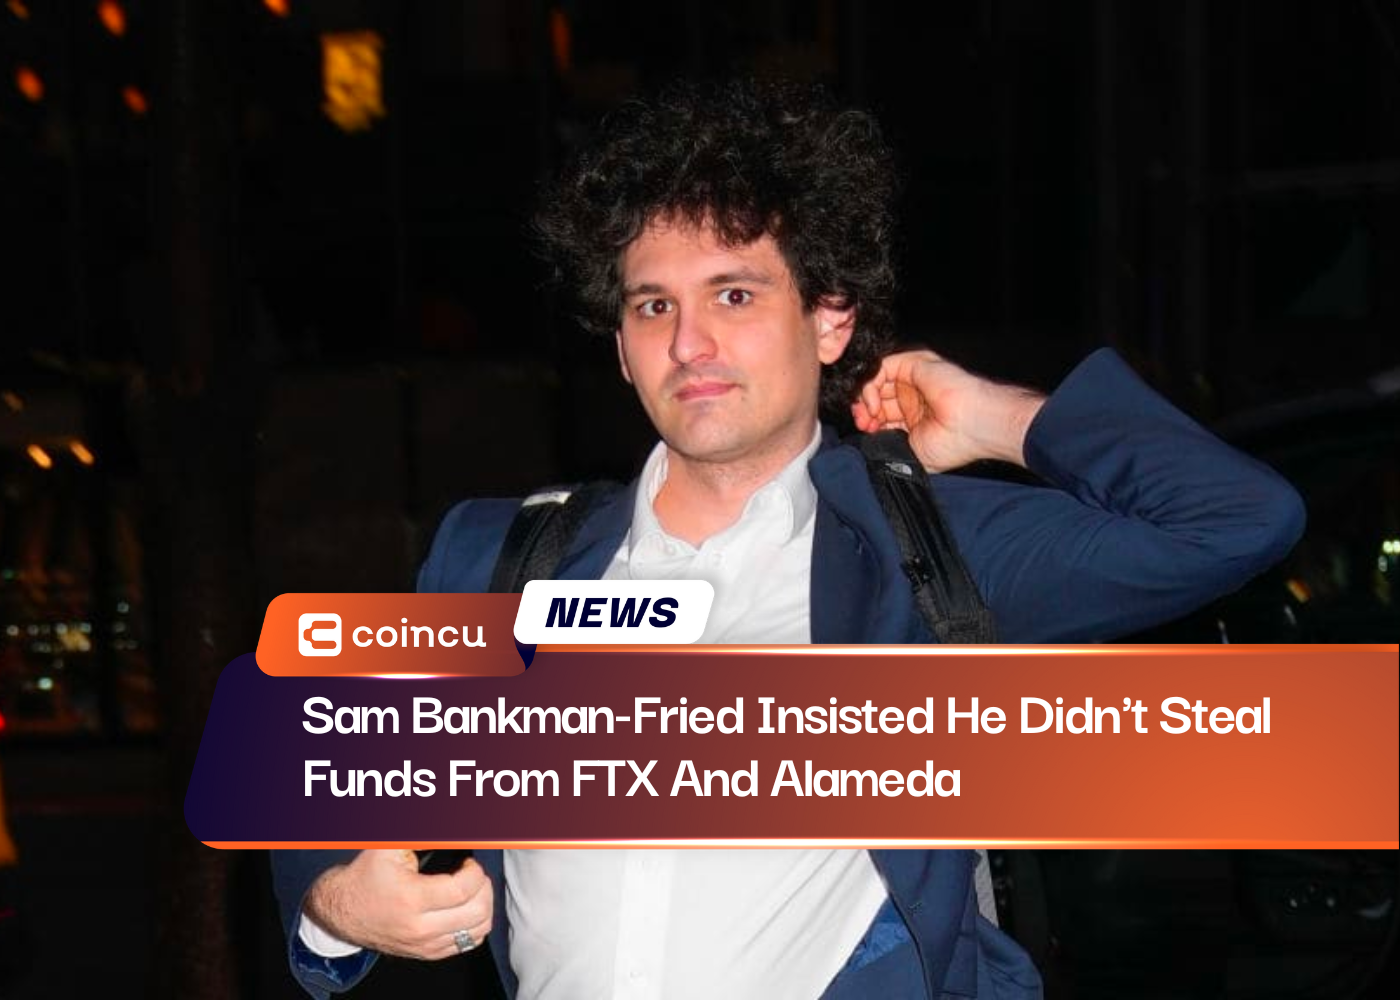 Sam Bankman-Fried Insisted He Didn't Steal Funds From FTX And Alameda